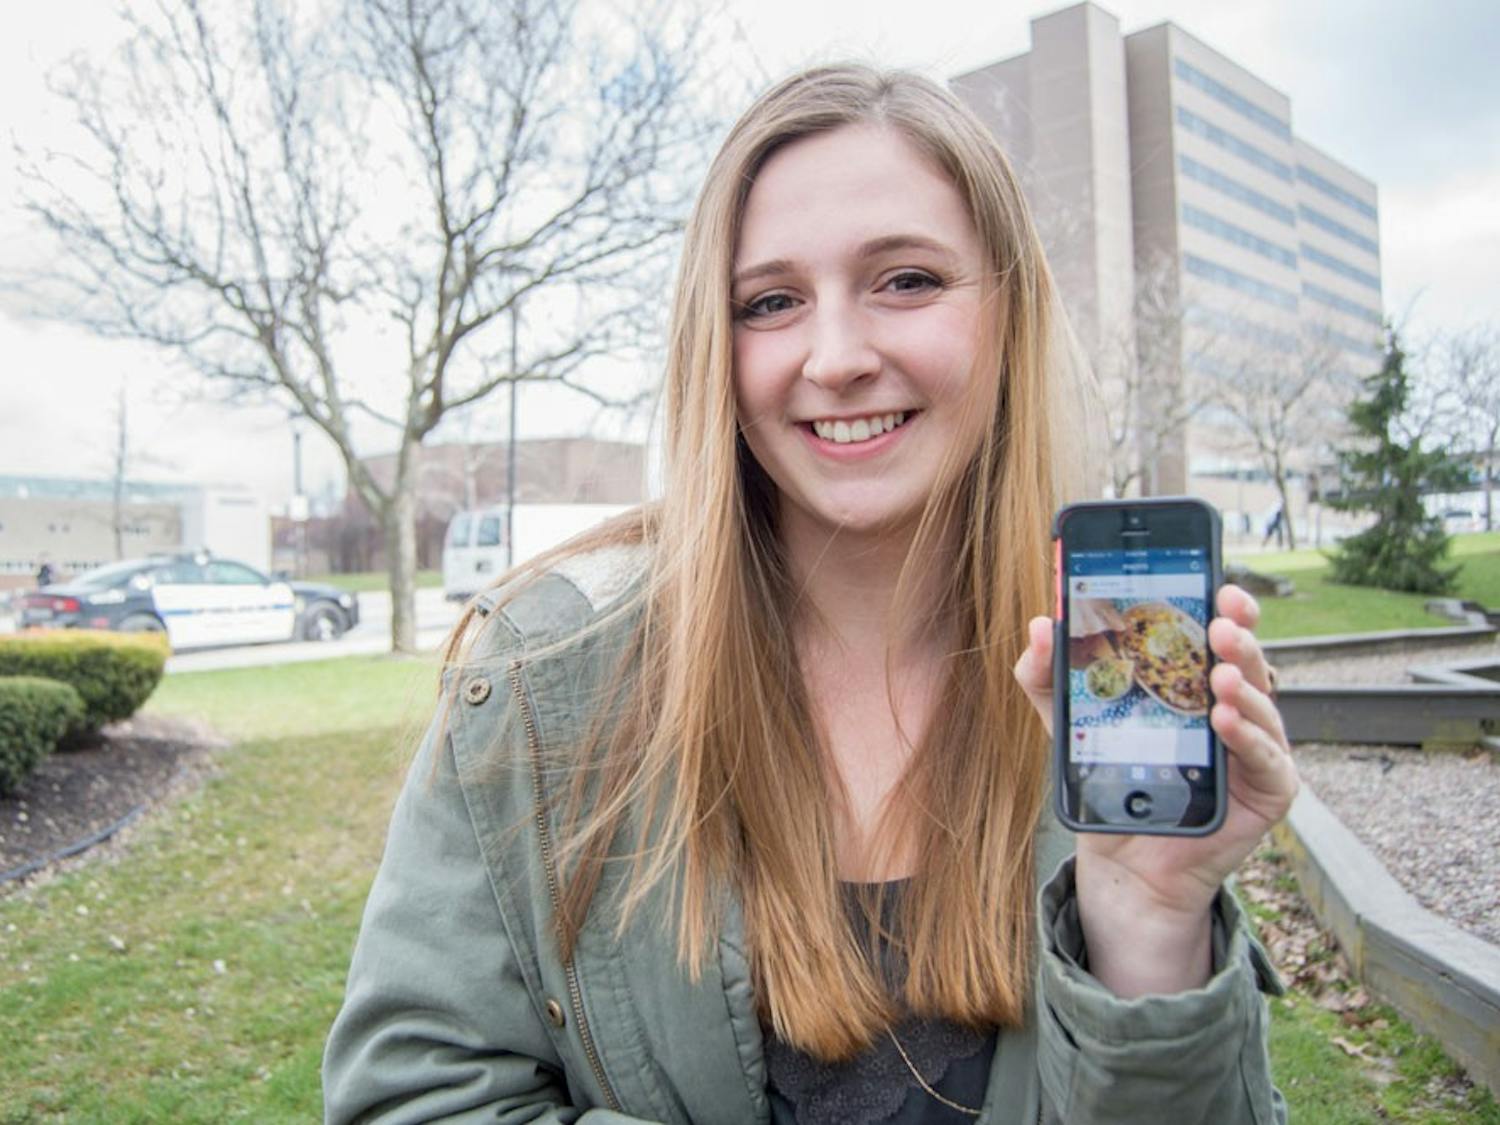 When Lisa Cannavale (pictured)&nbsp;first came to UB she found that the school didn’t have social media dedicated to showing food options on campus. This led Cannavale to create the Instagram page UB_Hungry, which now has over 300 followers.